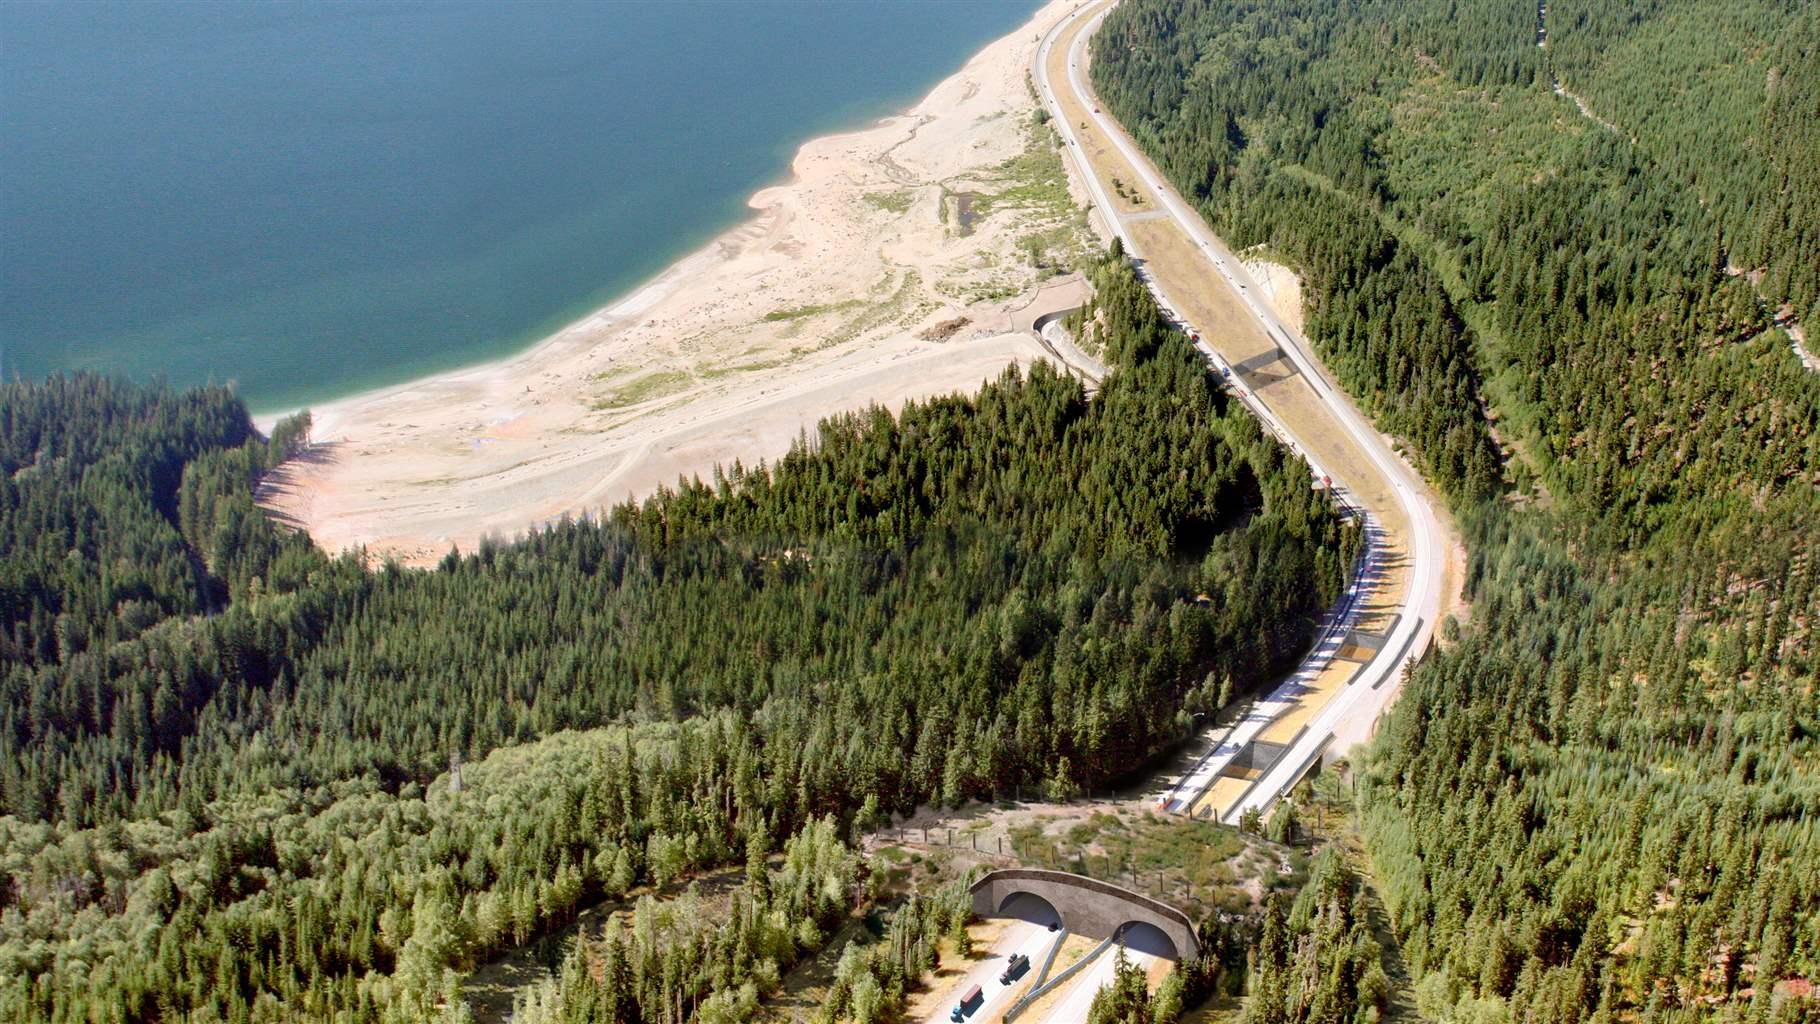 Vegetation covers a wildlife bridge that links forested areas bisected by a highway; a deep blue body of water with a sandy shore is visible beyond the tree line. 